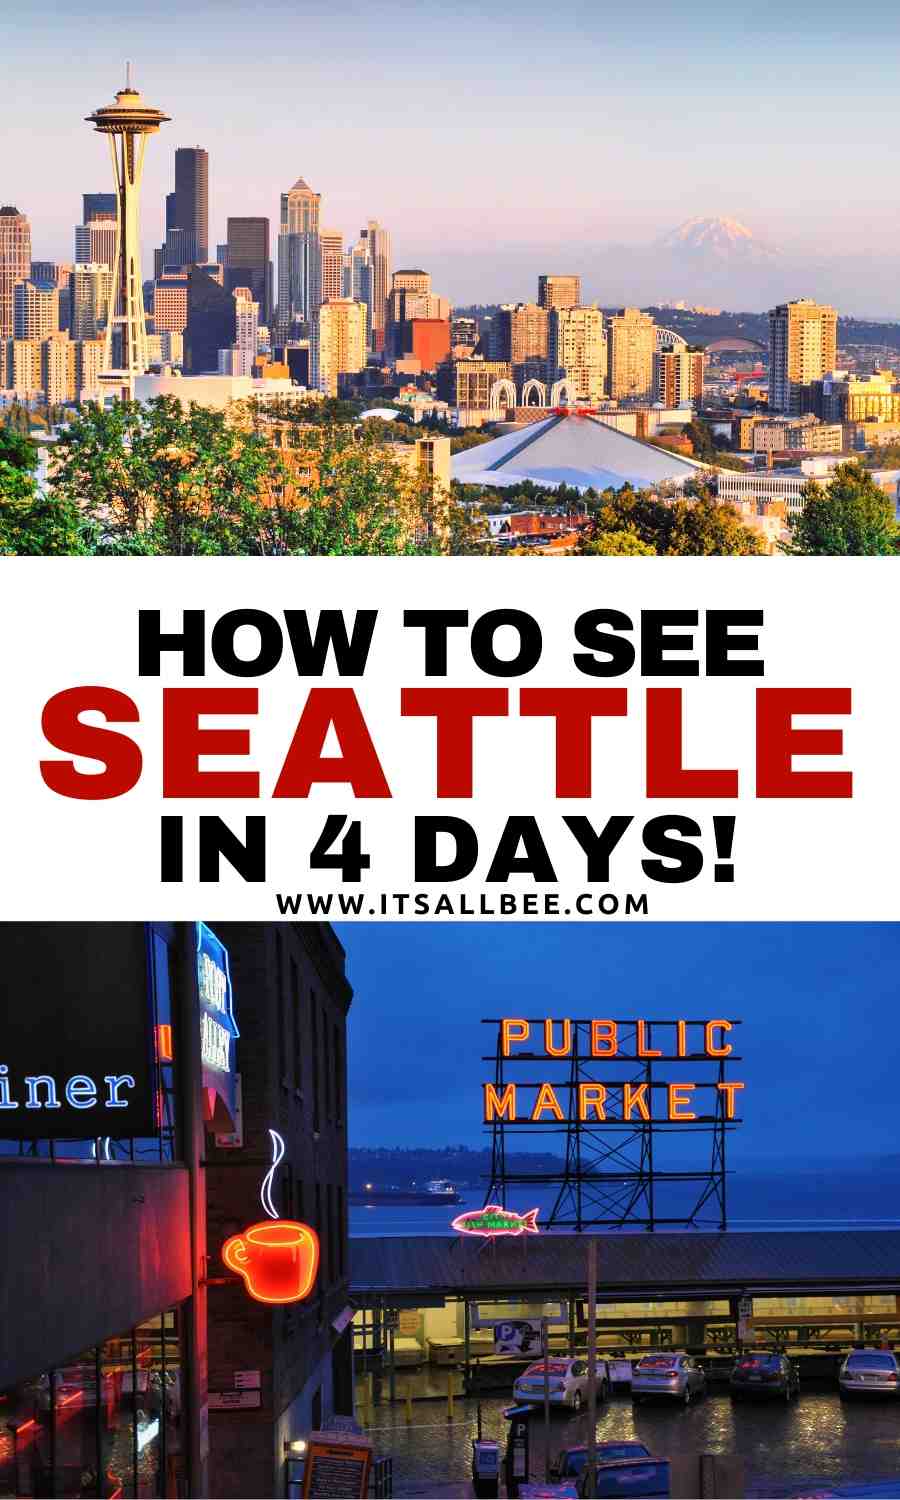 What to do in Seattle in 4 days